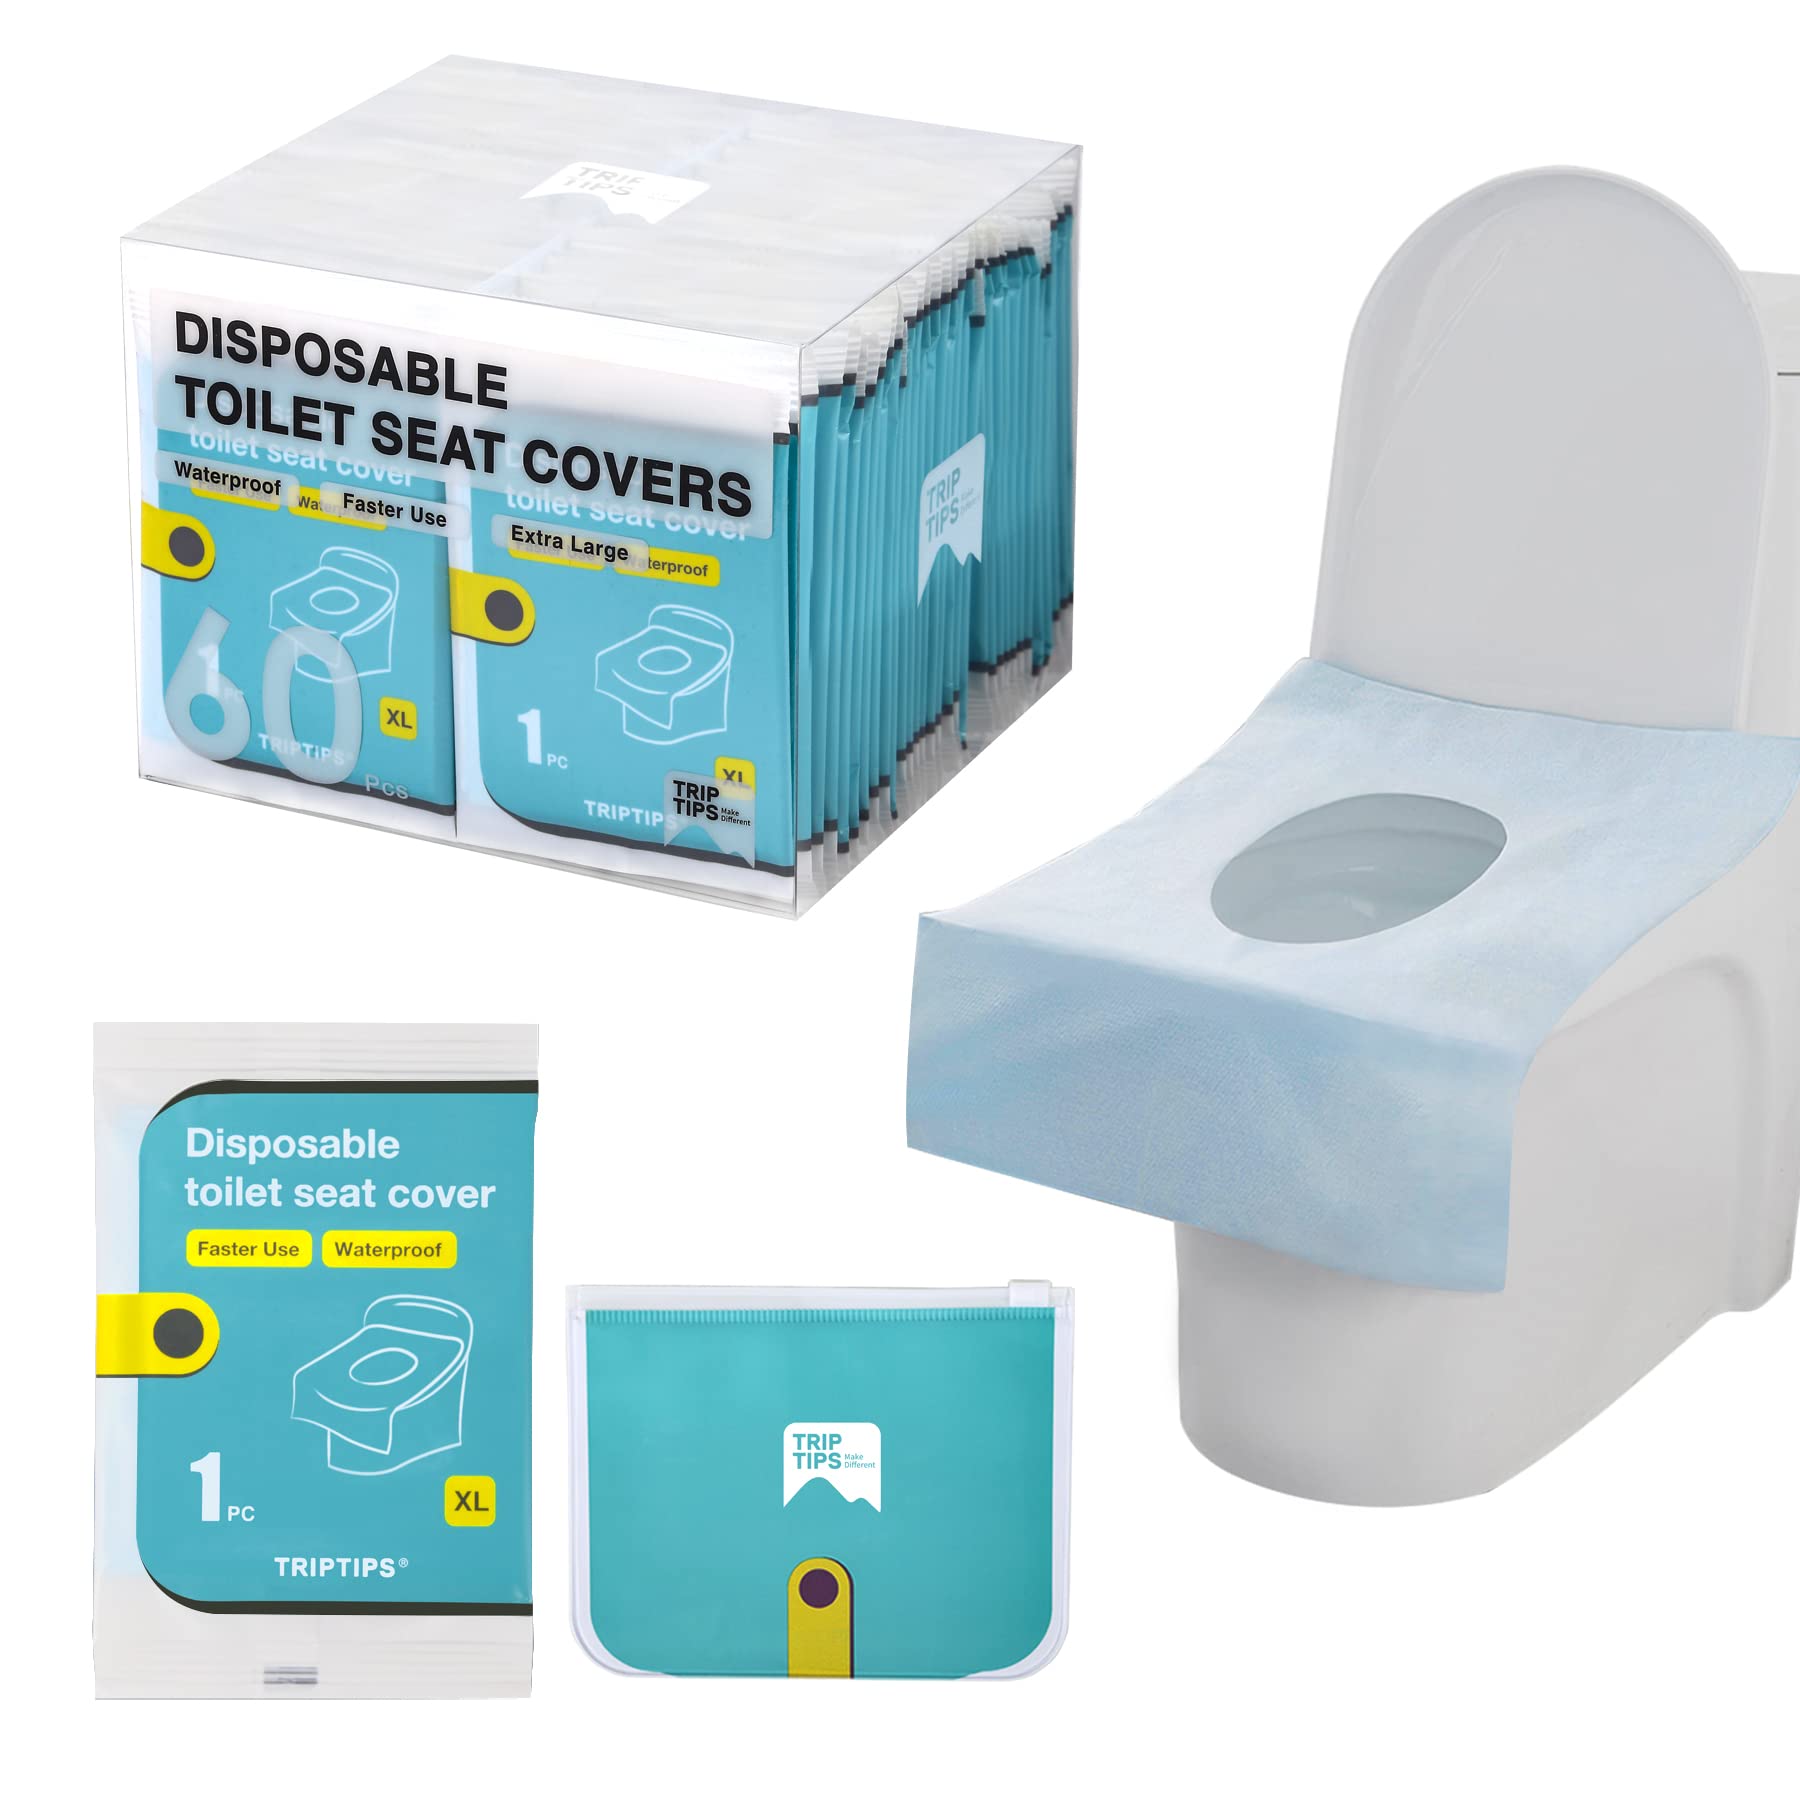 TRIPTIPS Toilet Seat Covers Disposable Travel Pack 60 count｜Faster use-Sticker free｜Waterproof｜XL Disposable Toilet Seat Cover